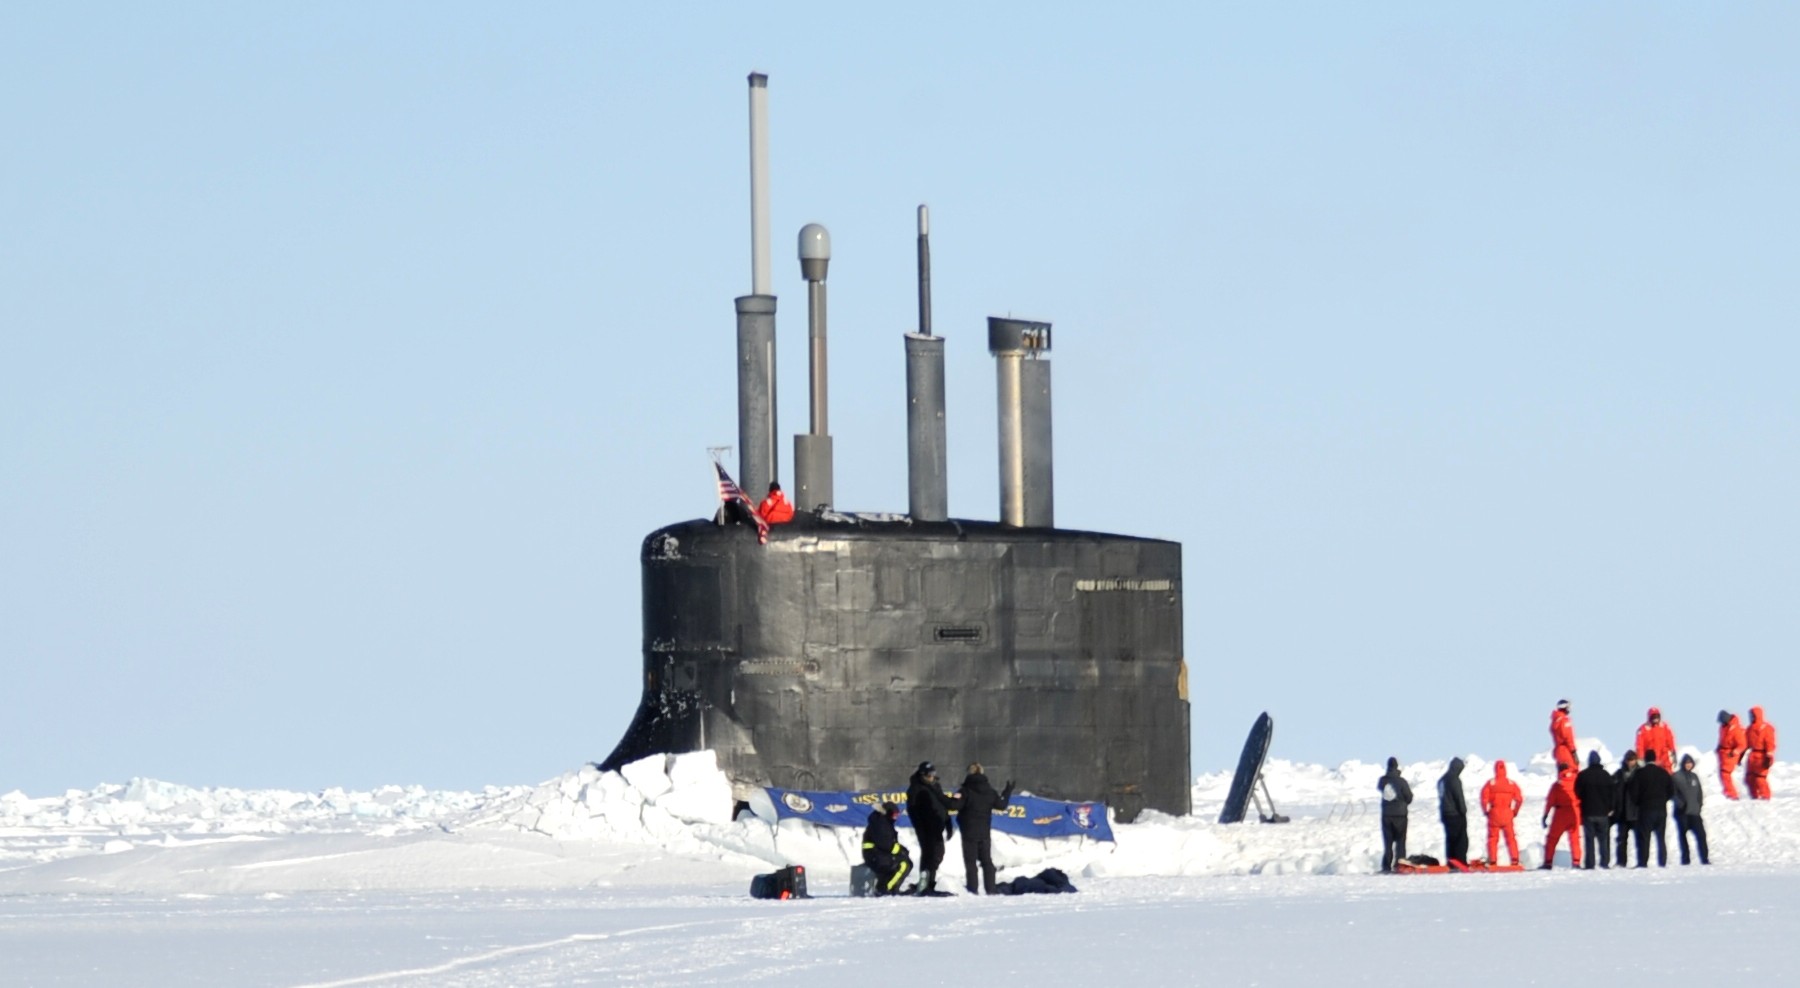 ssn-22 uss connecticut seawolf class attack submarine us navy exercise icex 18 arctic ocean 41